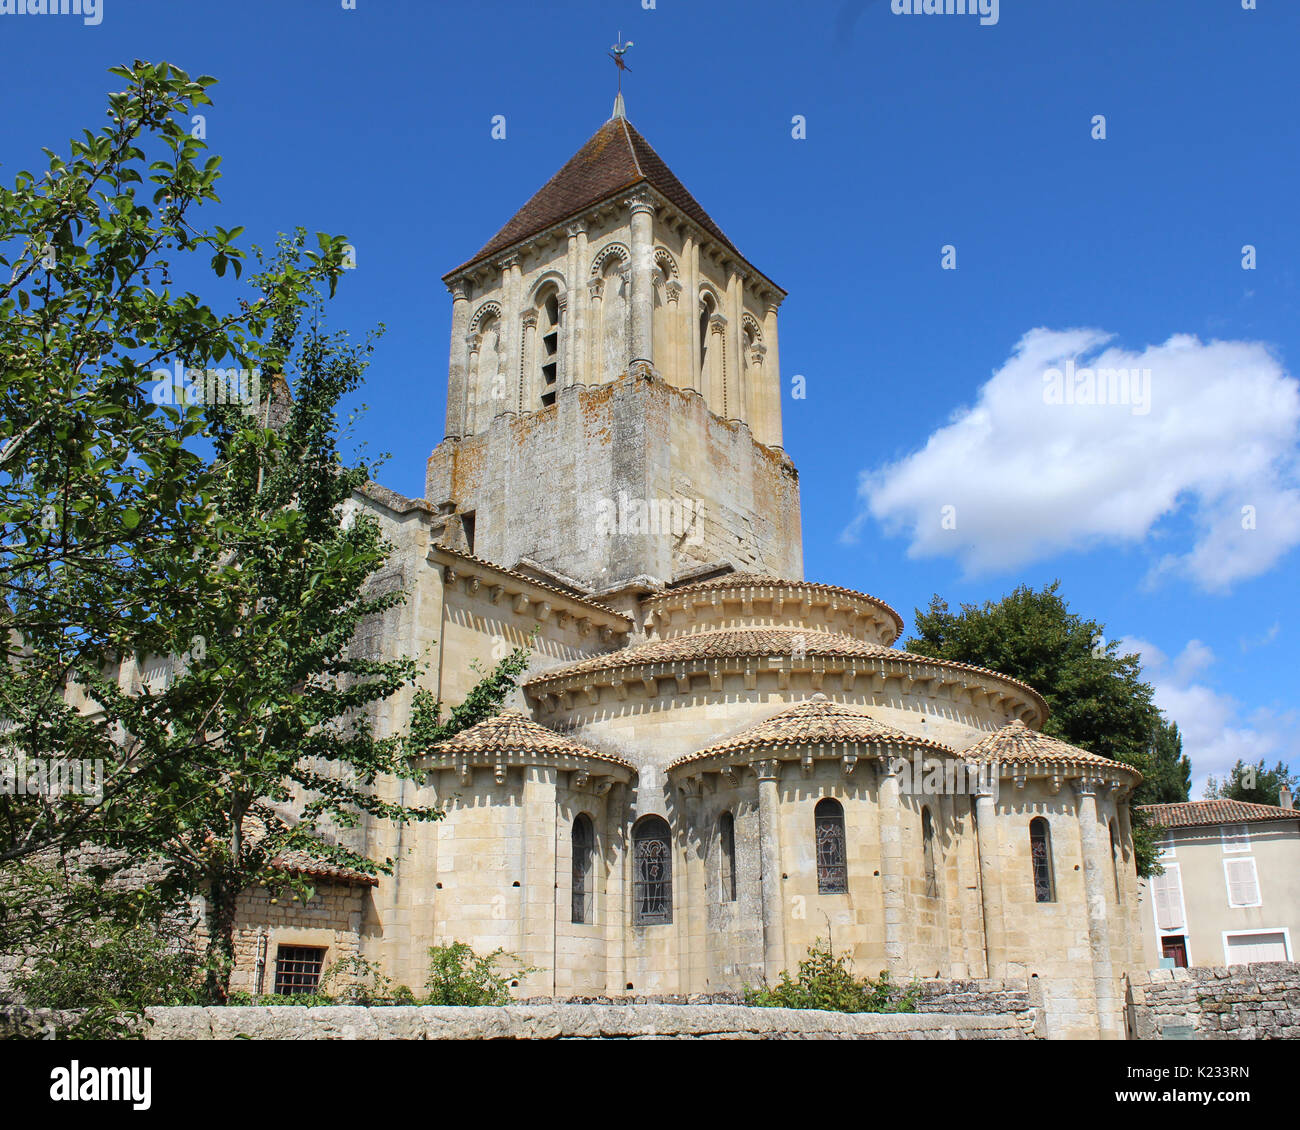 The beautiful 12th century church of St Hilaire in Melle, France. Saint-Hilaire Church is also a UNESCO World Heritage Site since 1998, and a stage of Stock Photo